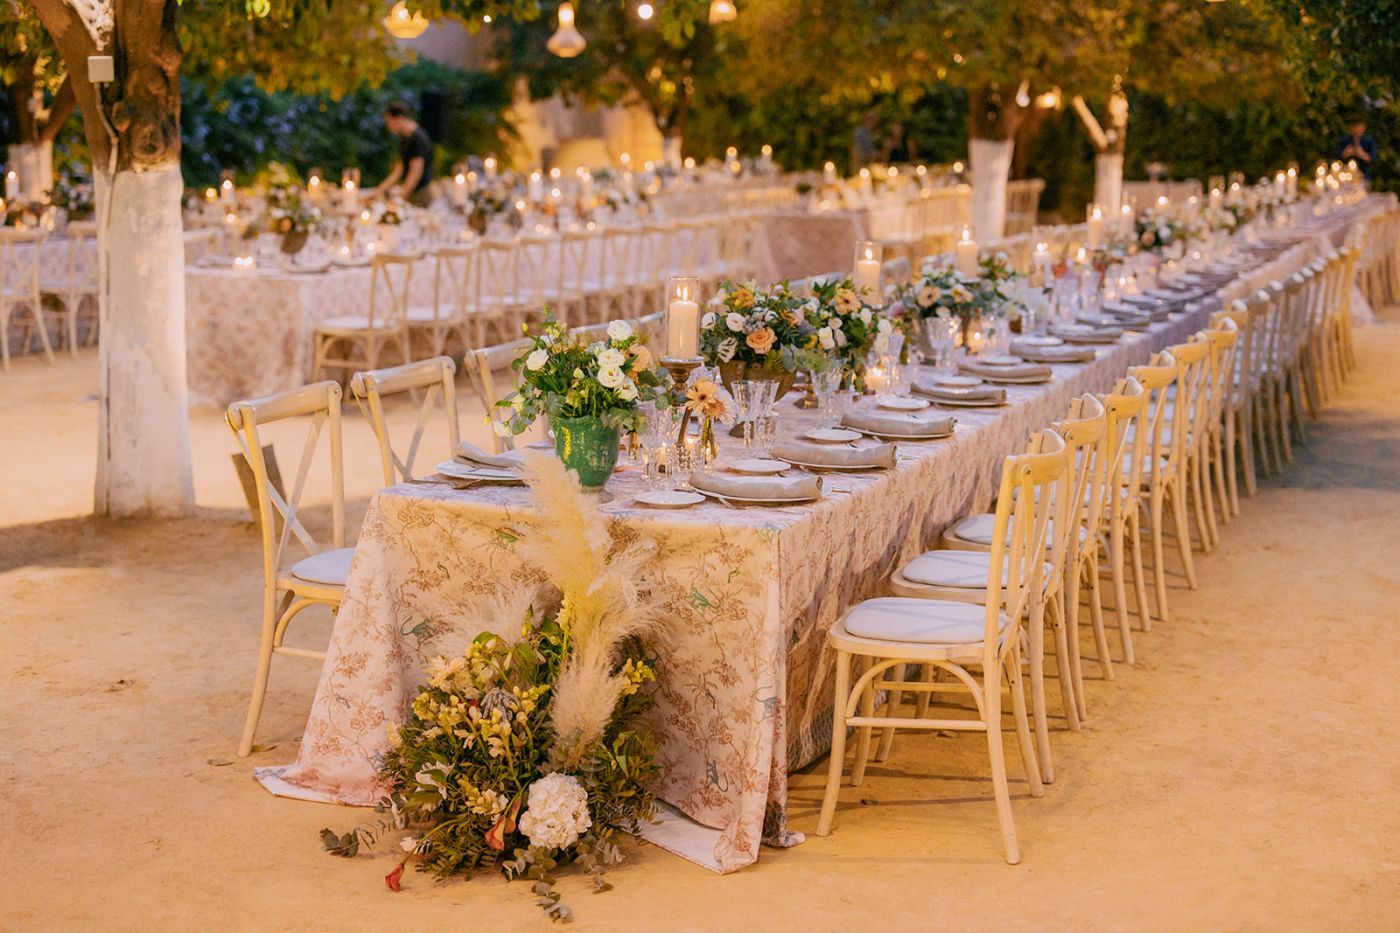 Pink customized tablecloth and flowers at the Lebanese wedding in Sevilla Spain